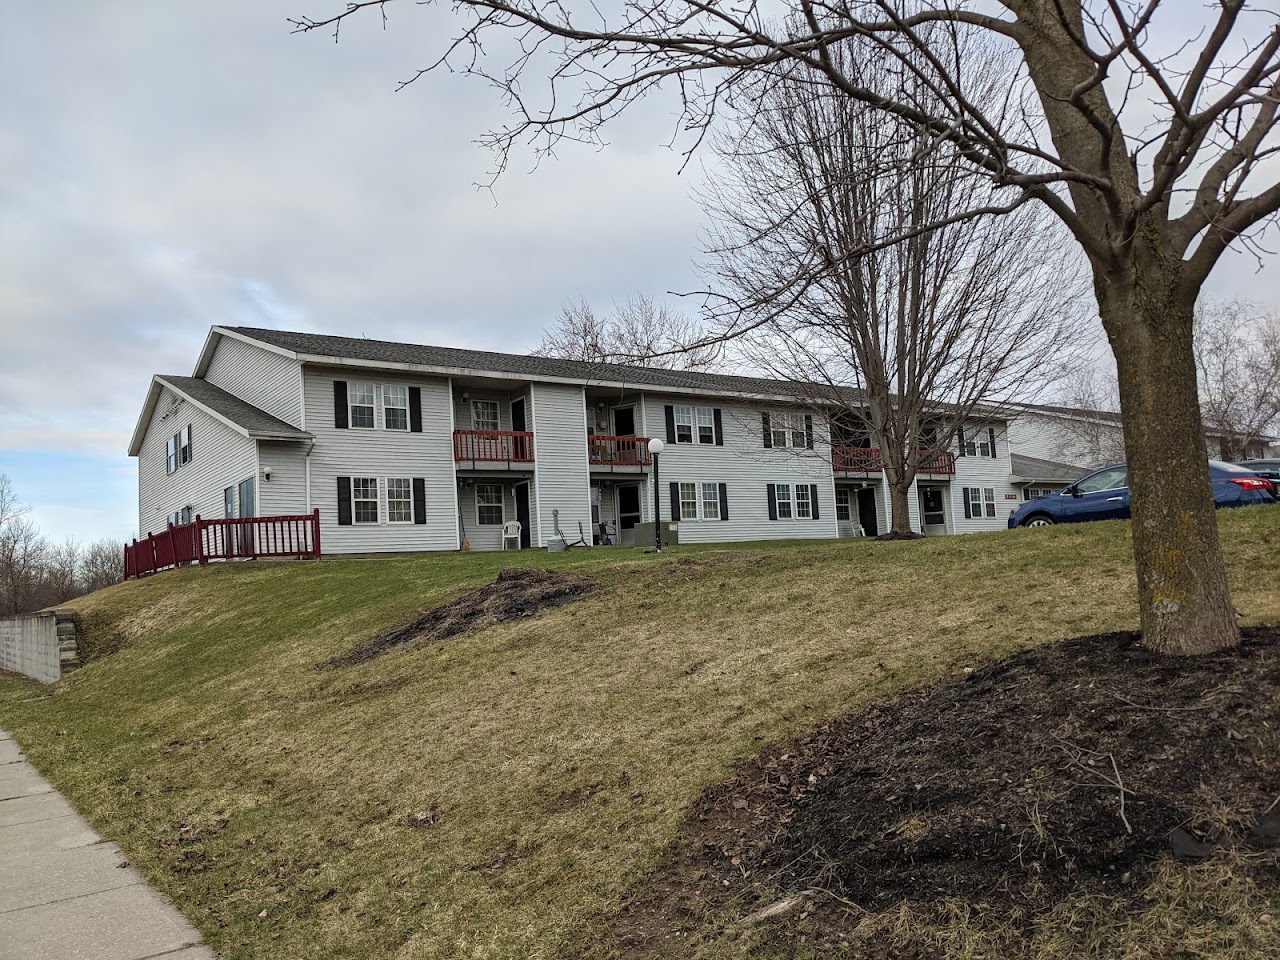 Photo of KELSEY CREEK APTS. Affordable housing located at 1202 SUPERIOR ST WATERTOWN, NY 13601